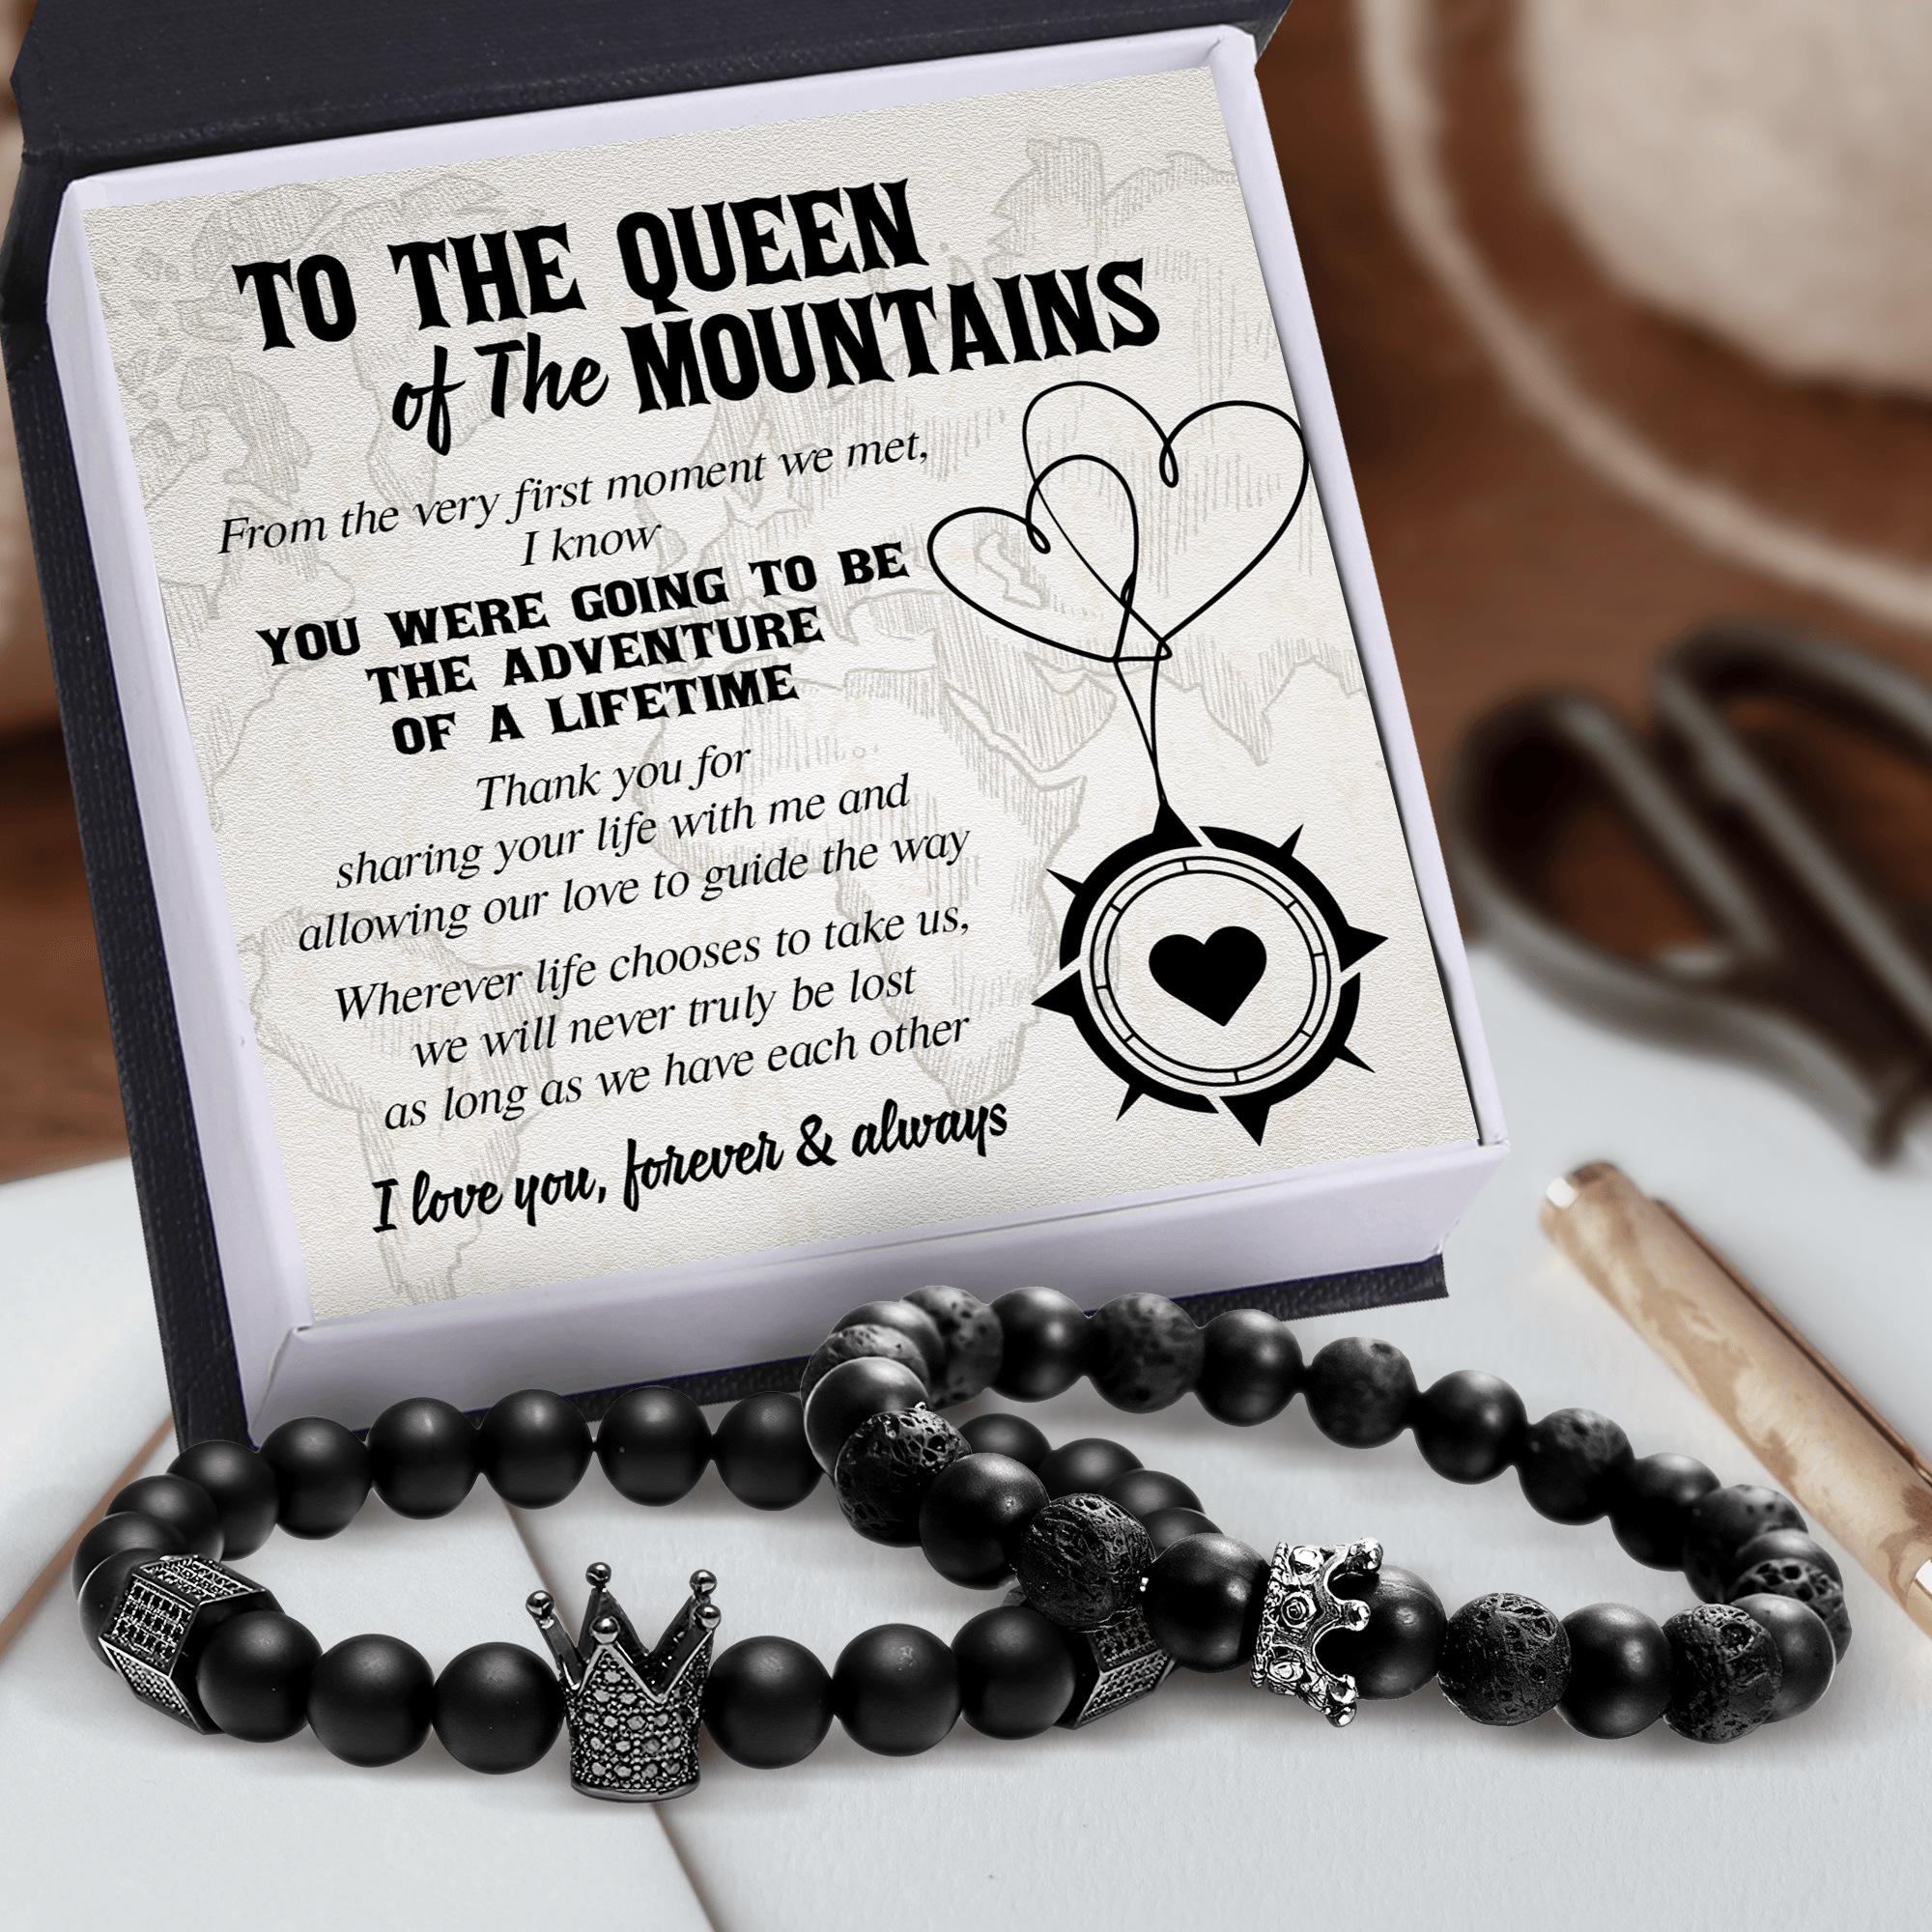 King & Queen Couple Bracelets - Hiking - To The Queen of The Mountains - Thank You For Sharing Your Life With Me - Augbae13006 - Gifts Holder